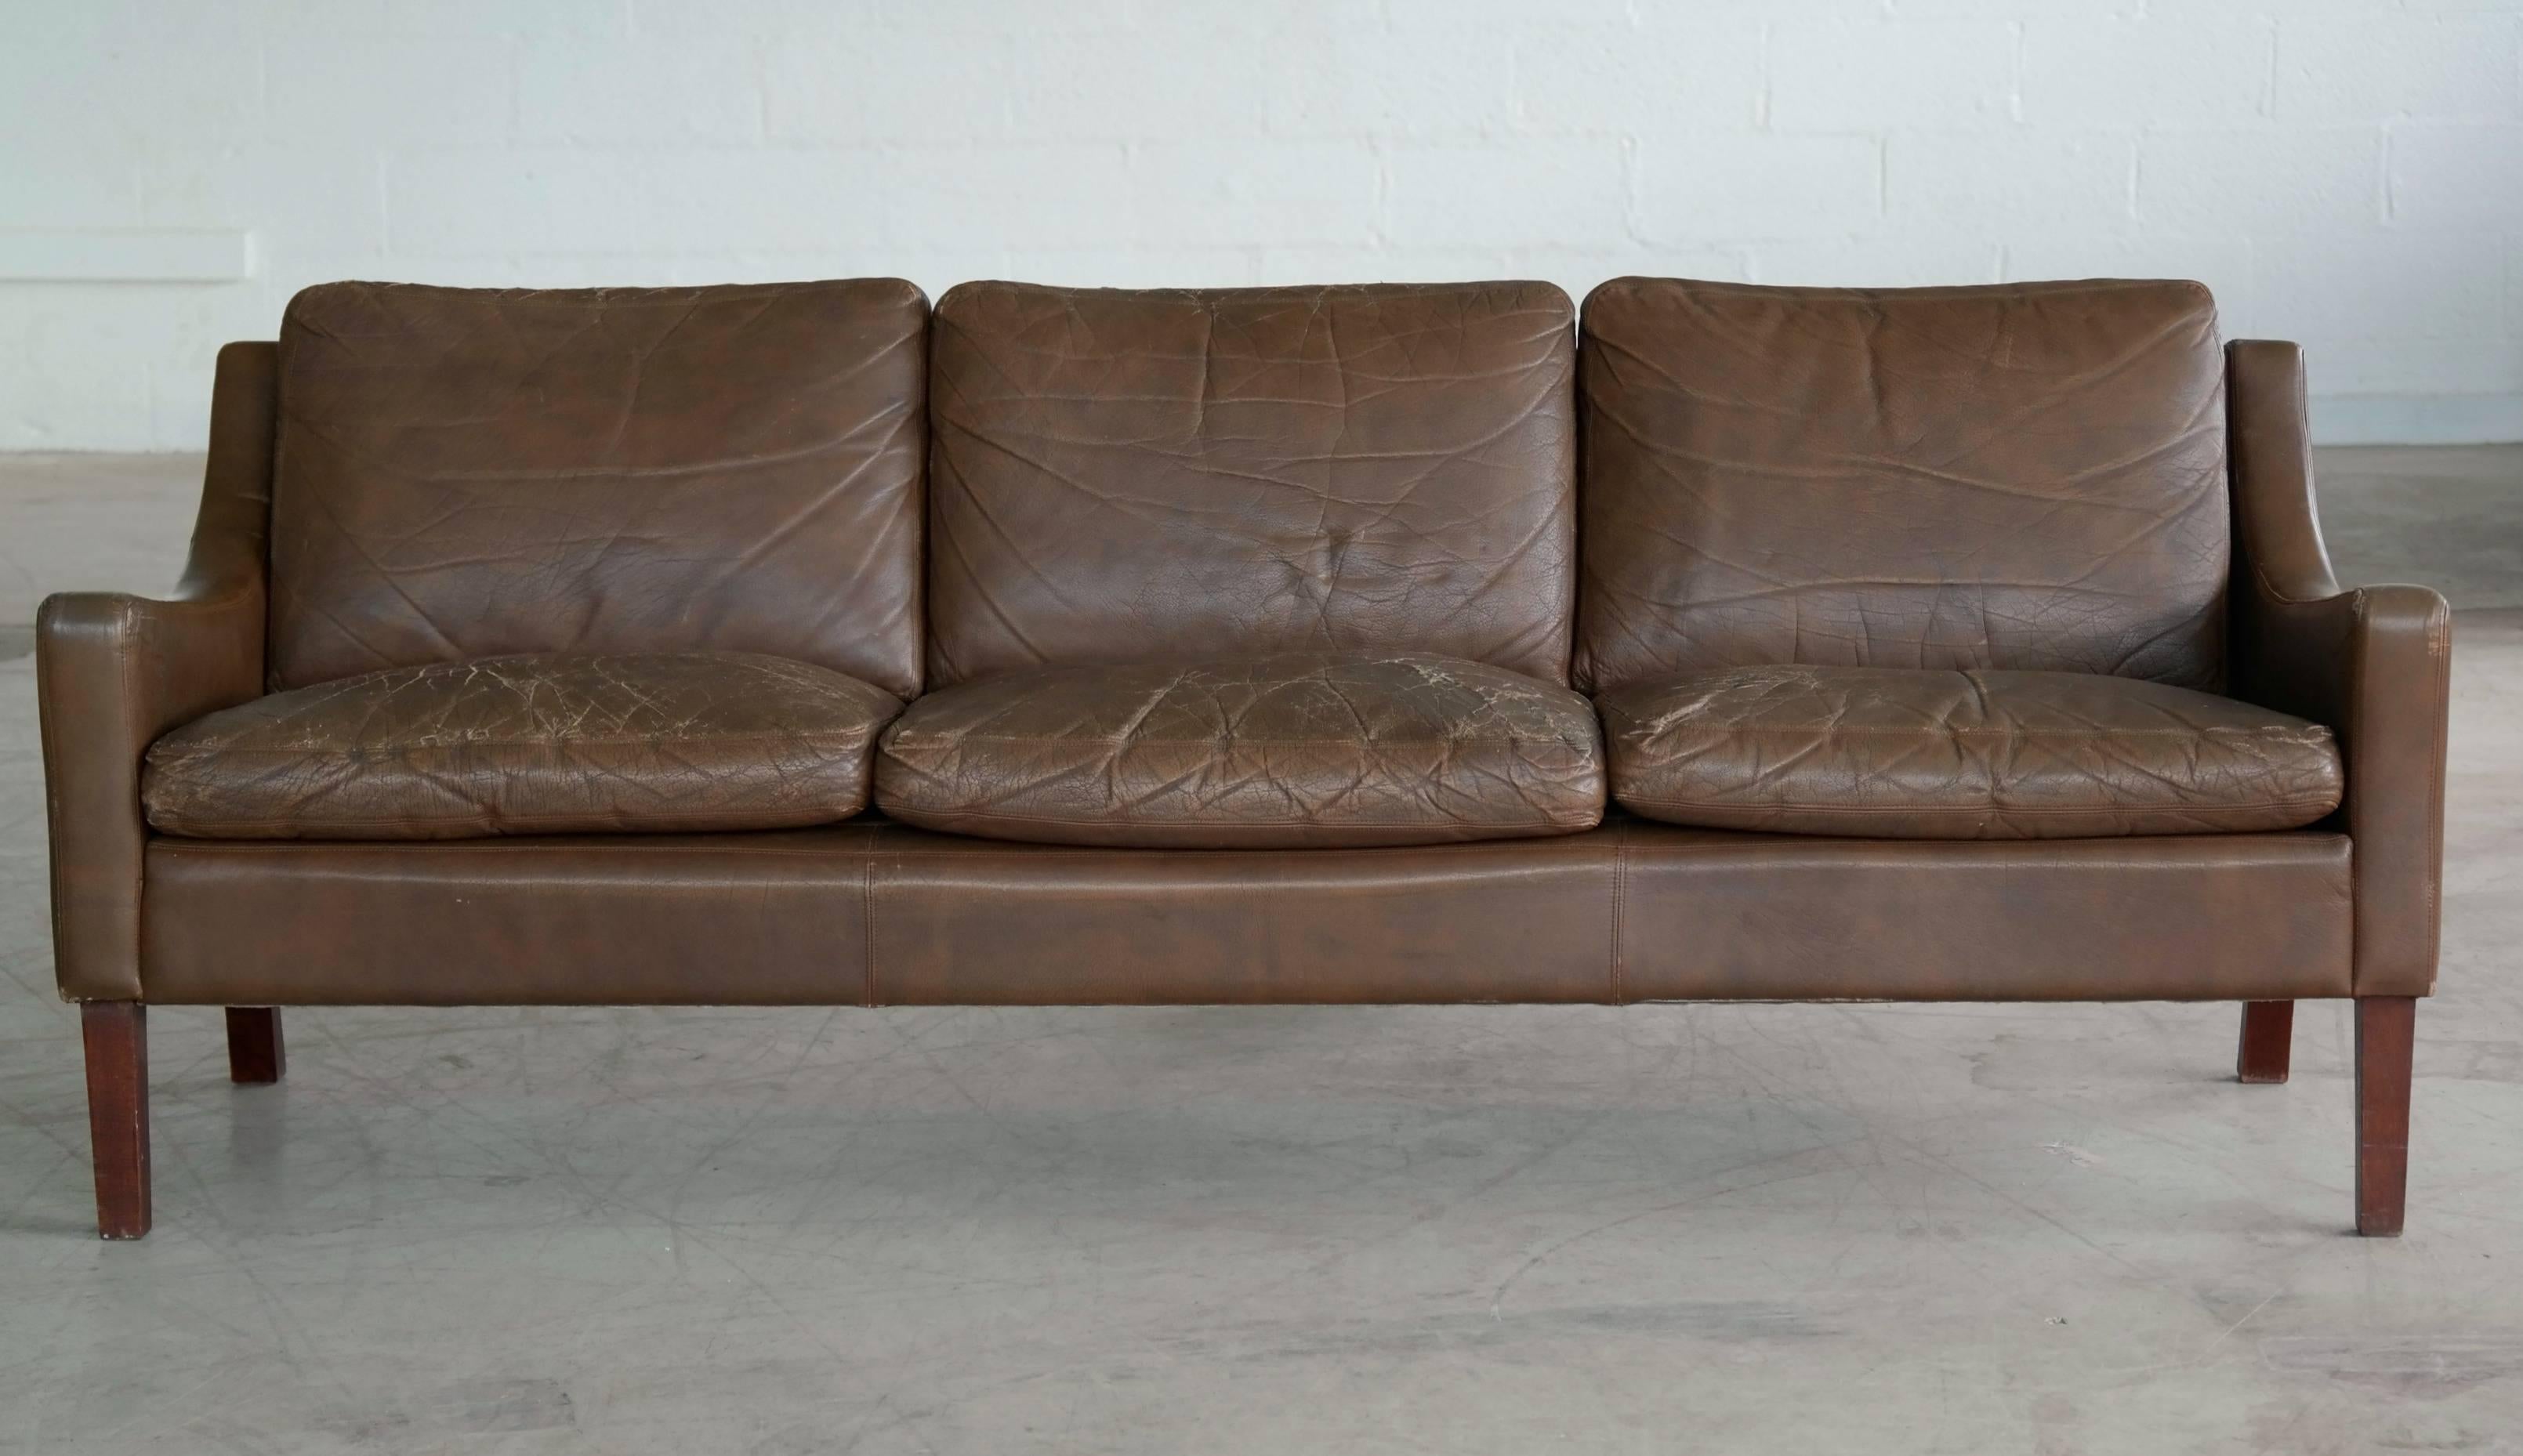 Very elegant low slung brown leather Danish Mid-Century sofa in the style of Børge Mogensen. Solid and sturdy construction on a beech frame and legs. The leather shows plenty of the wear and patina throughout giving it that sought after distressed